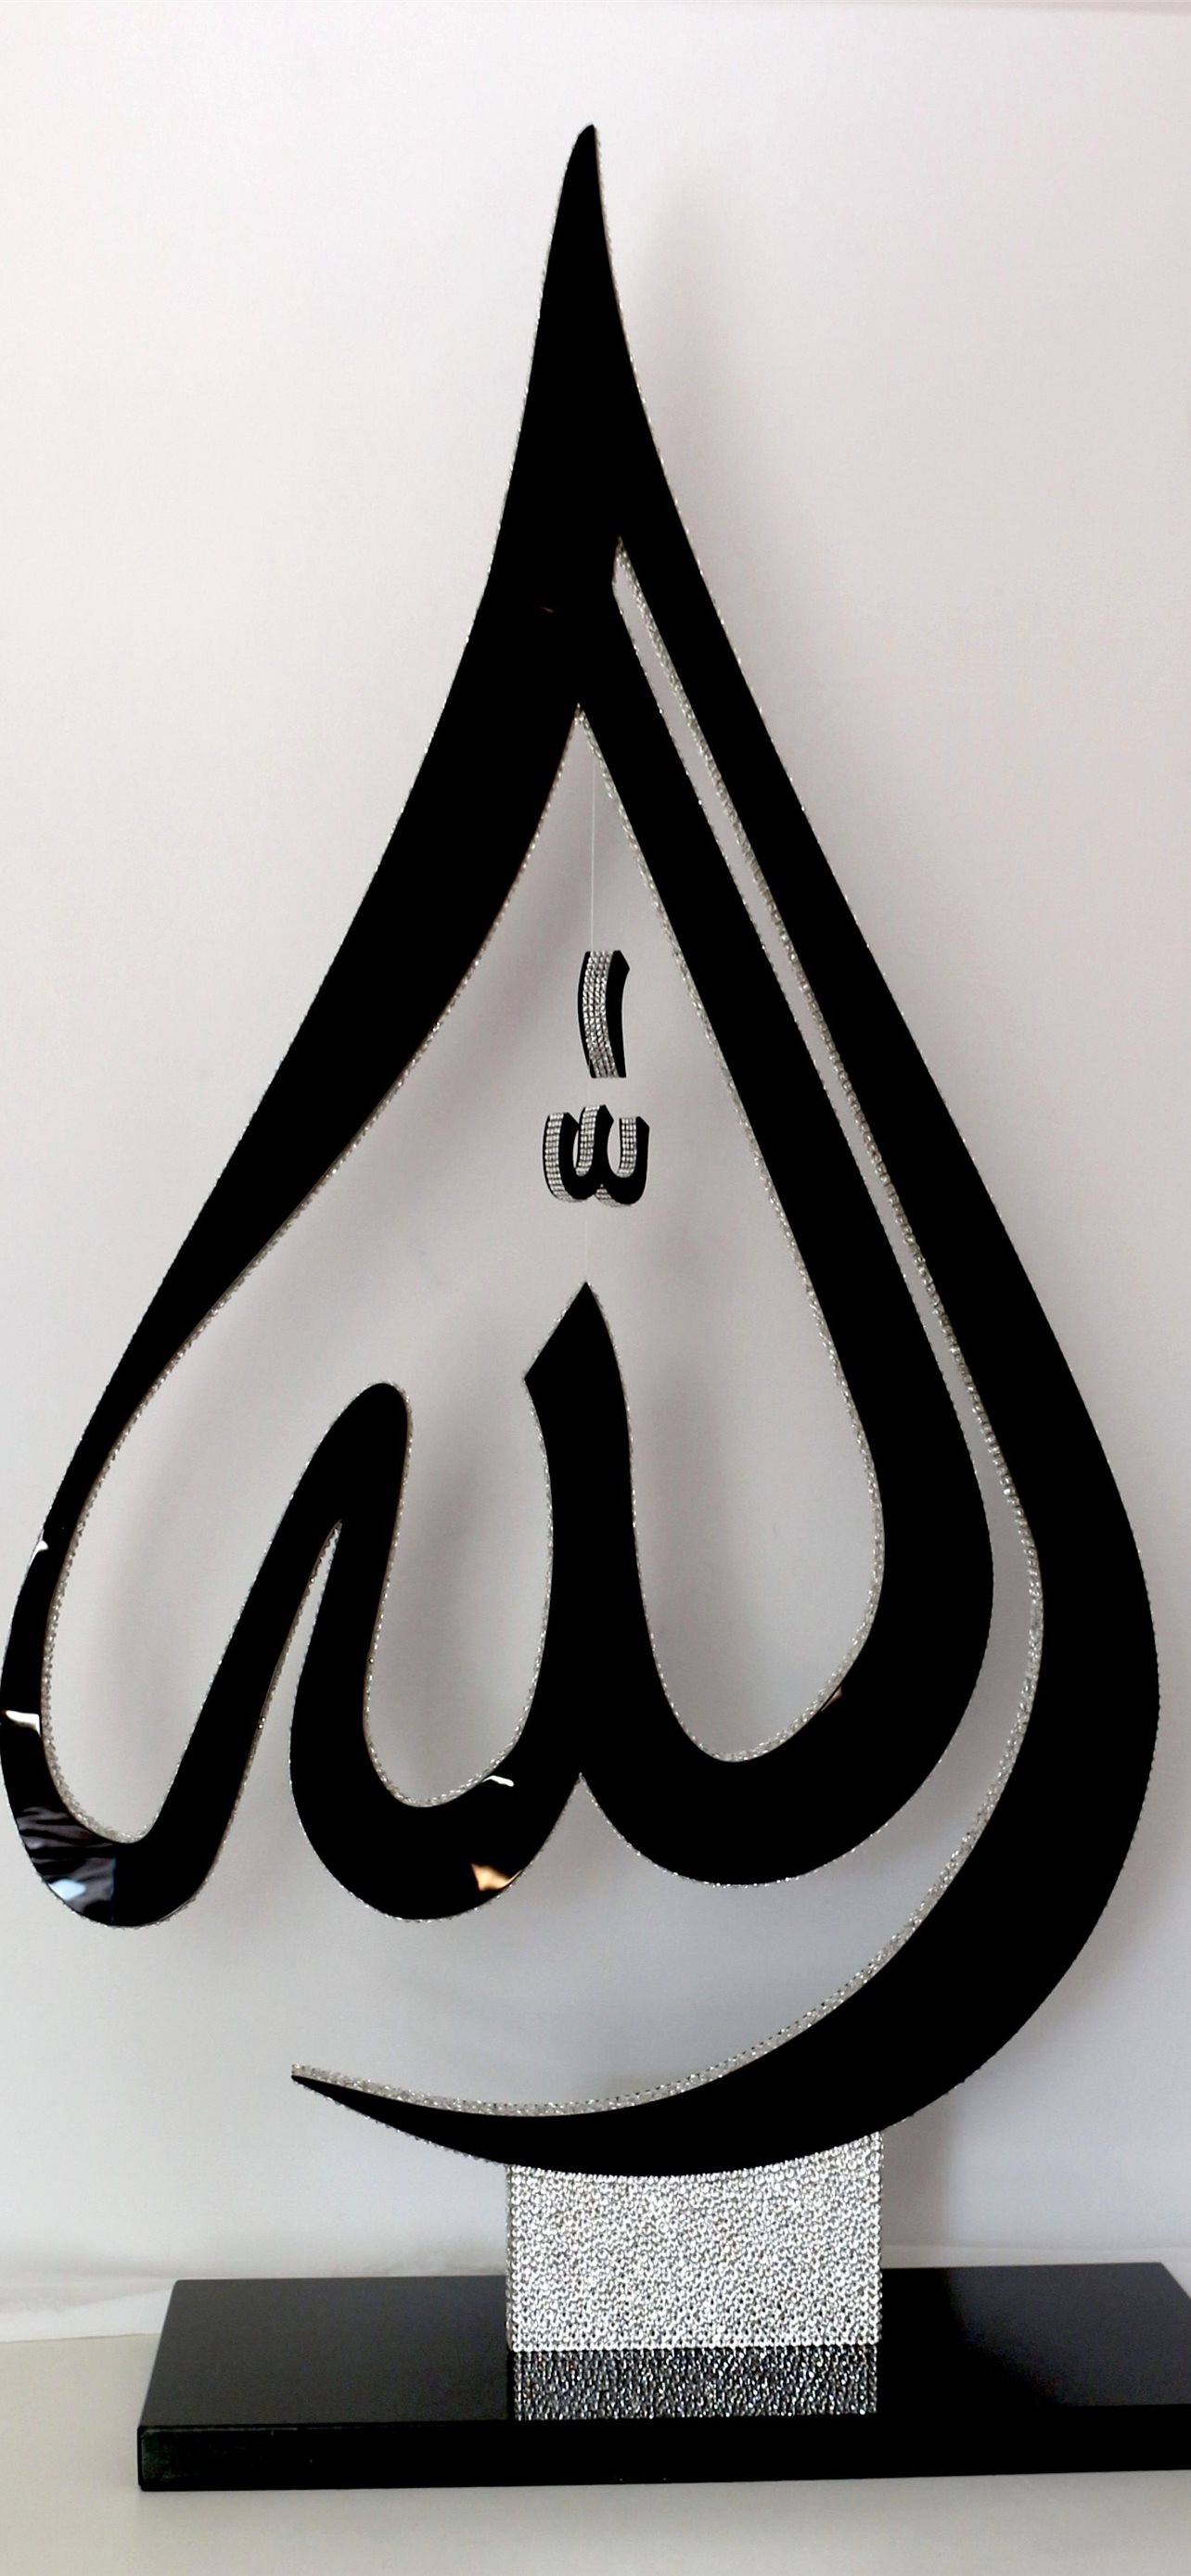 Allah Sculpture with Swarovski crystal iPhone Wallpapers Free Download